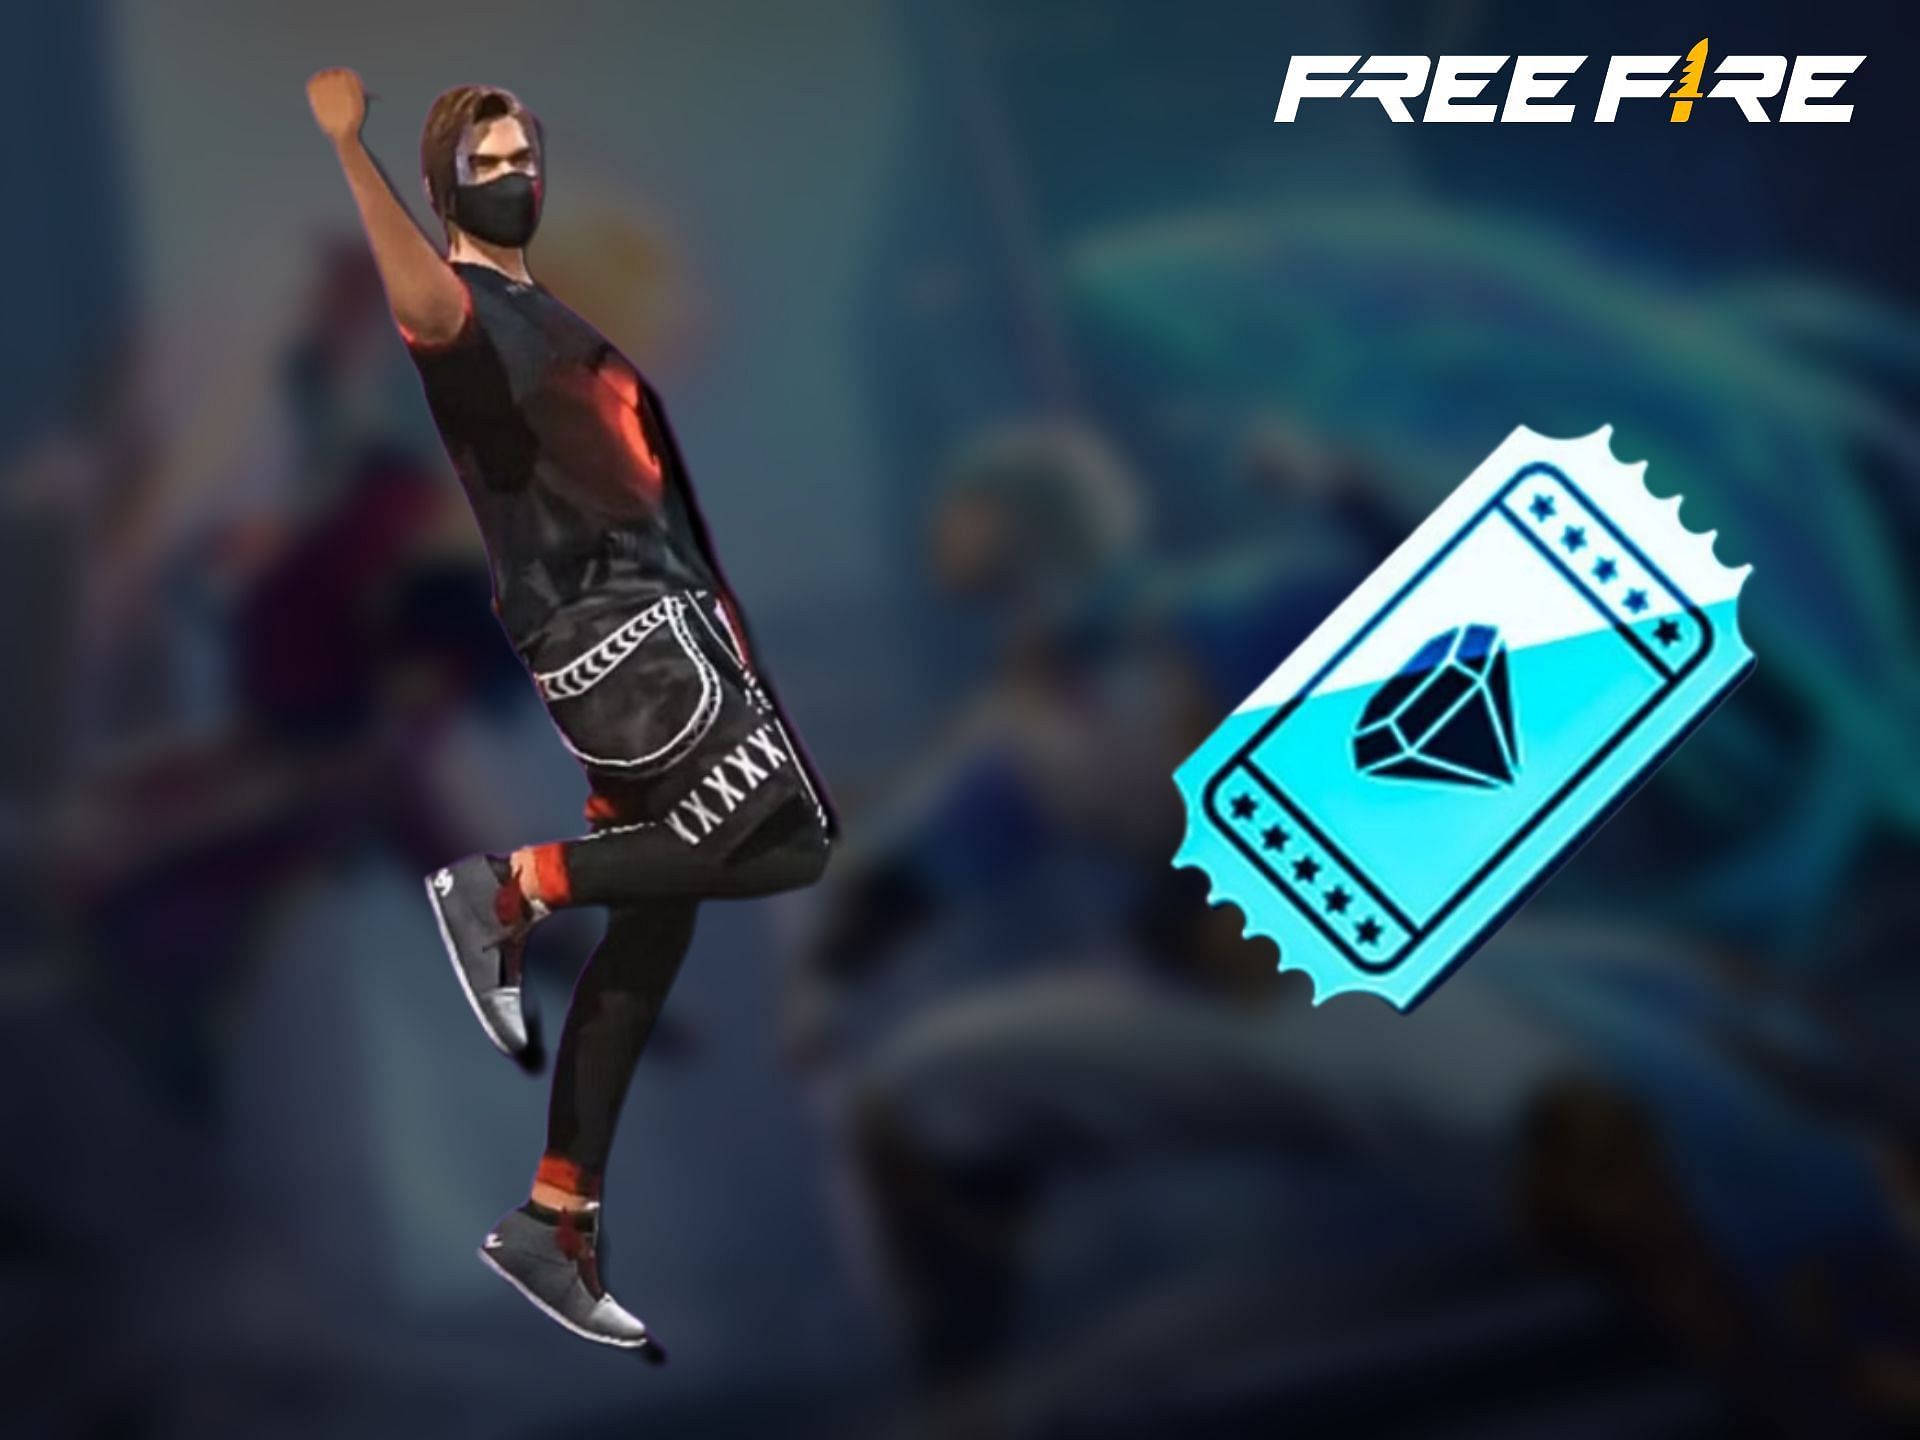 Free Fire redeem codes today (9 January 2023): Latest FF codes to get free  emotes and characters